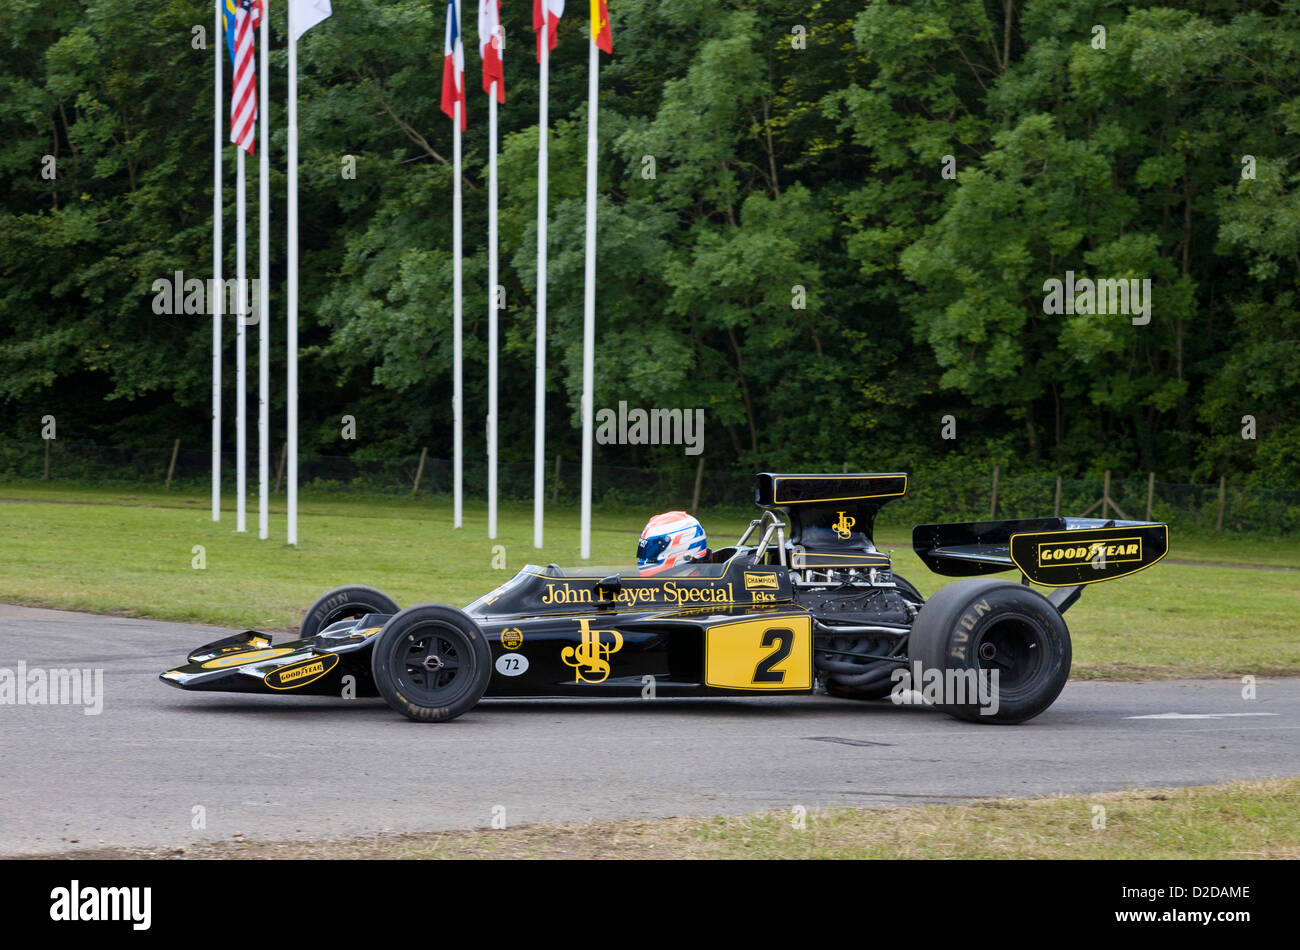 1974 Lotus-Cosworth 72E mit Fahrer Jacky Ickx auf die 2012 Goodwood Festival of Speed, Sussex, UK. Stockfoto